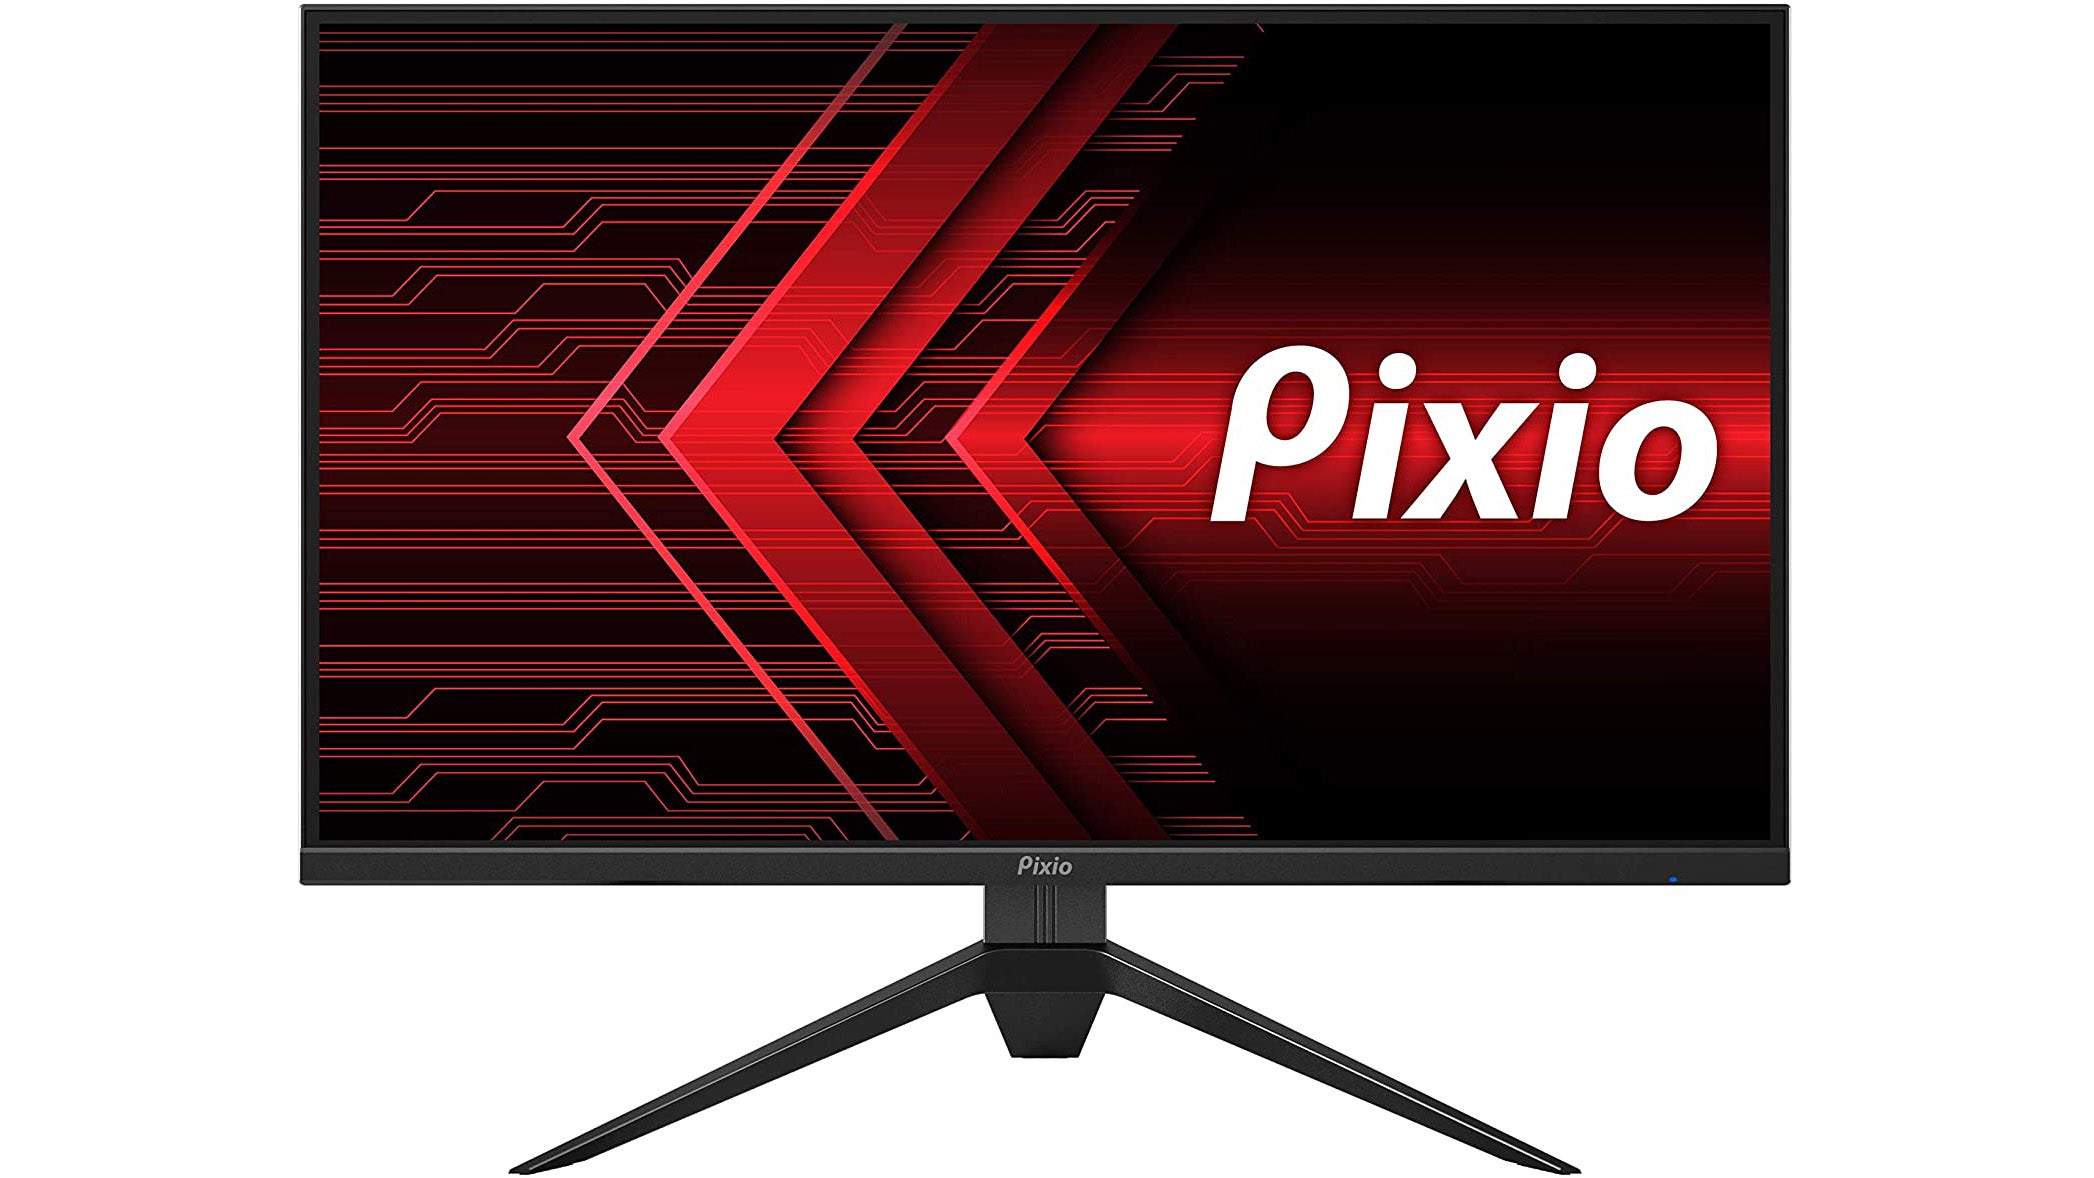 Pixio PX277 Prime gaming monitor, shown with a skinny stand and exciting graphics